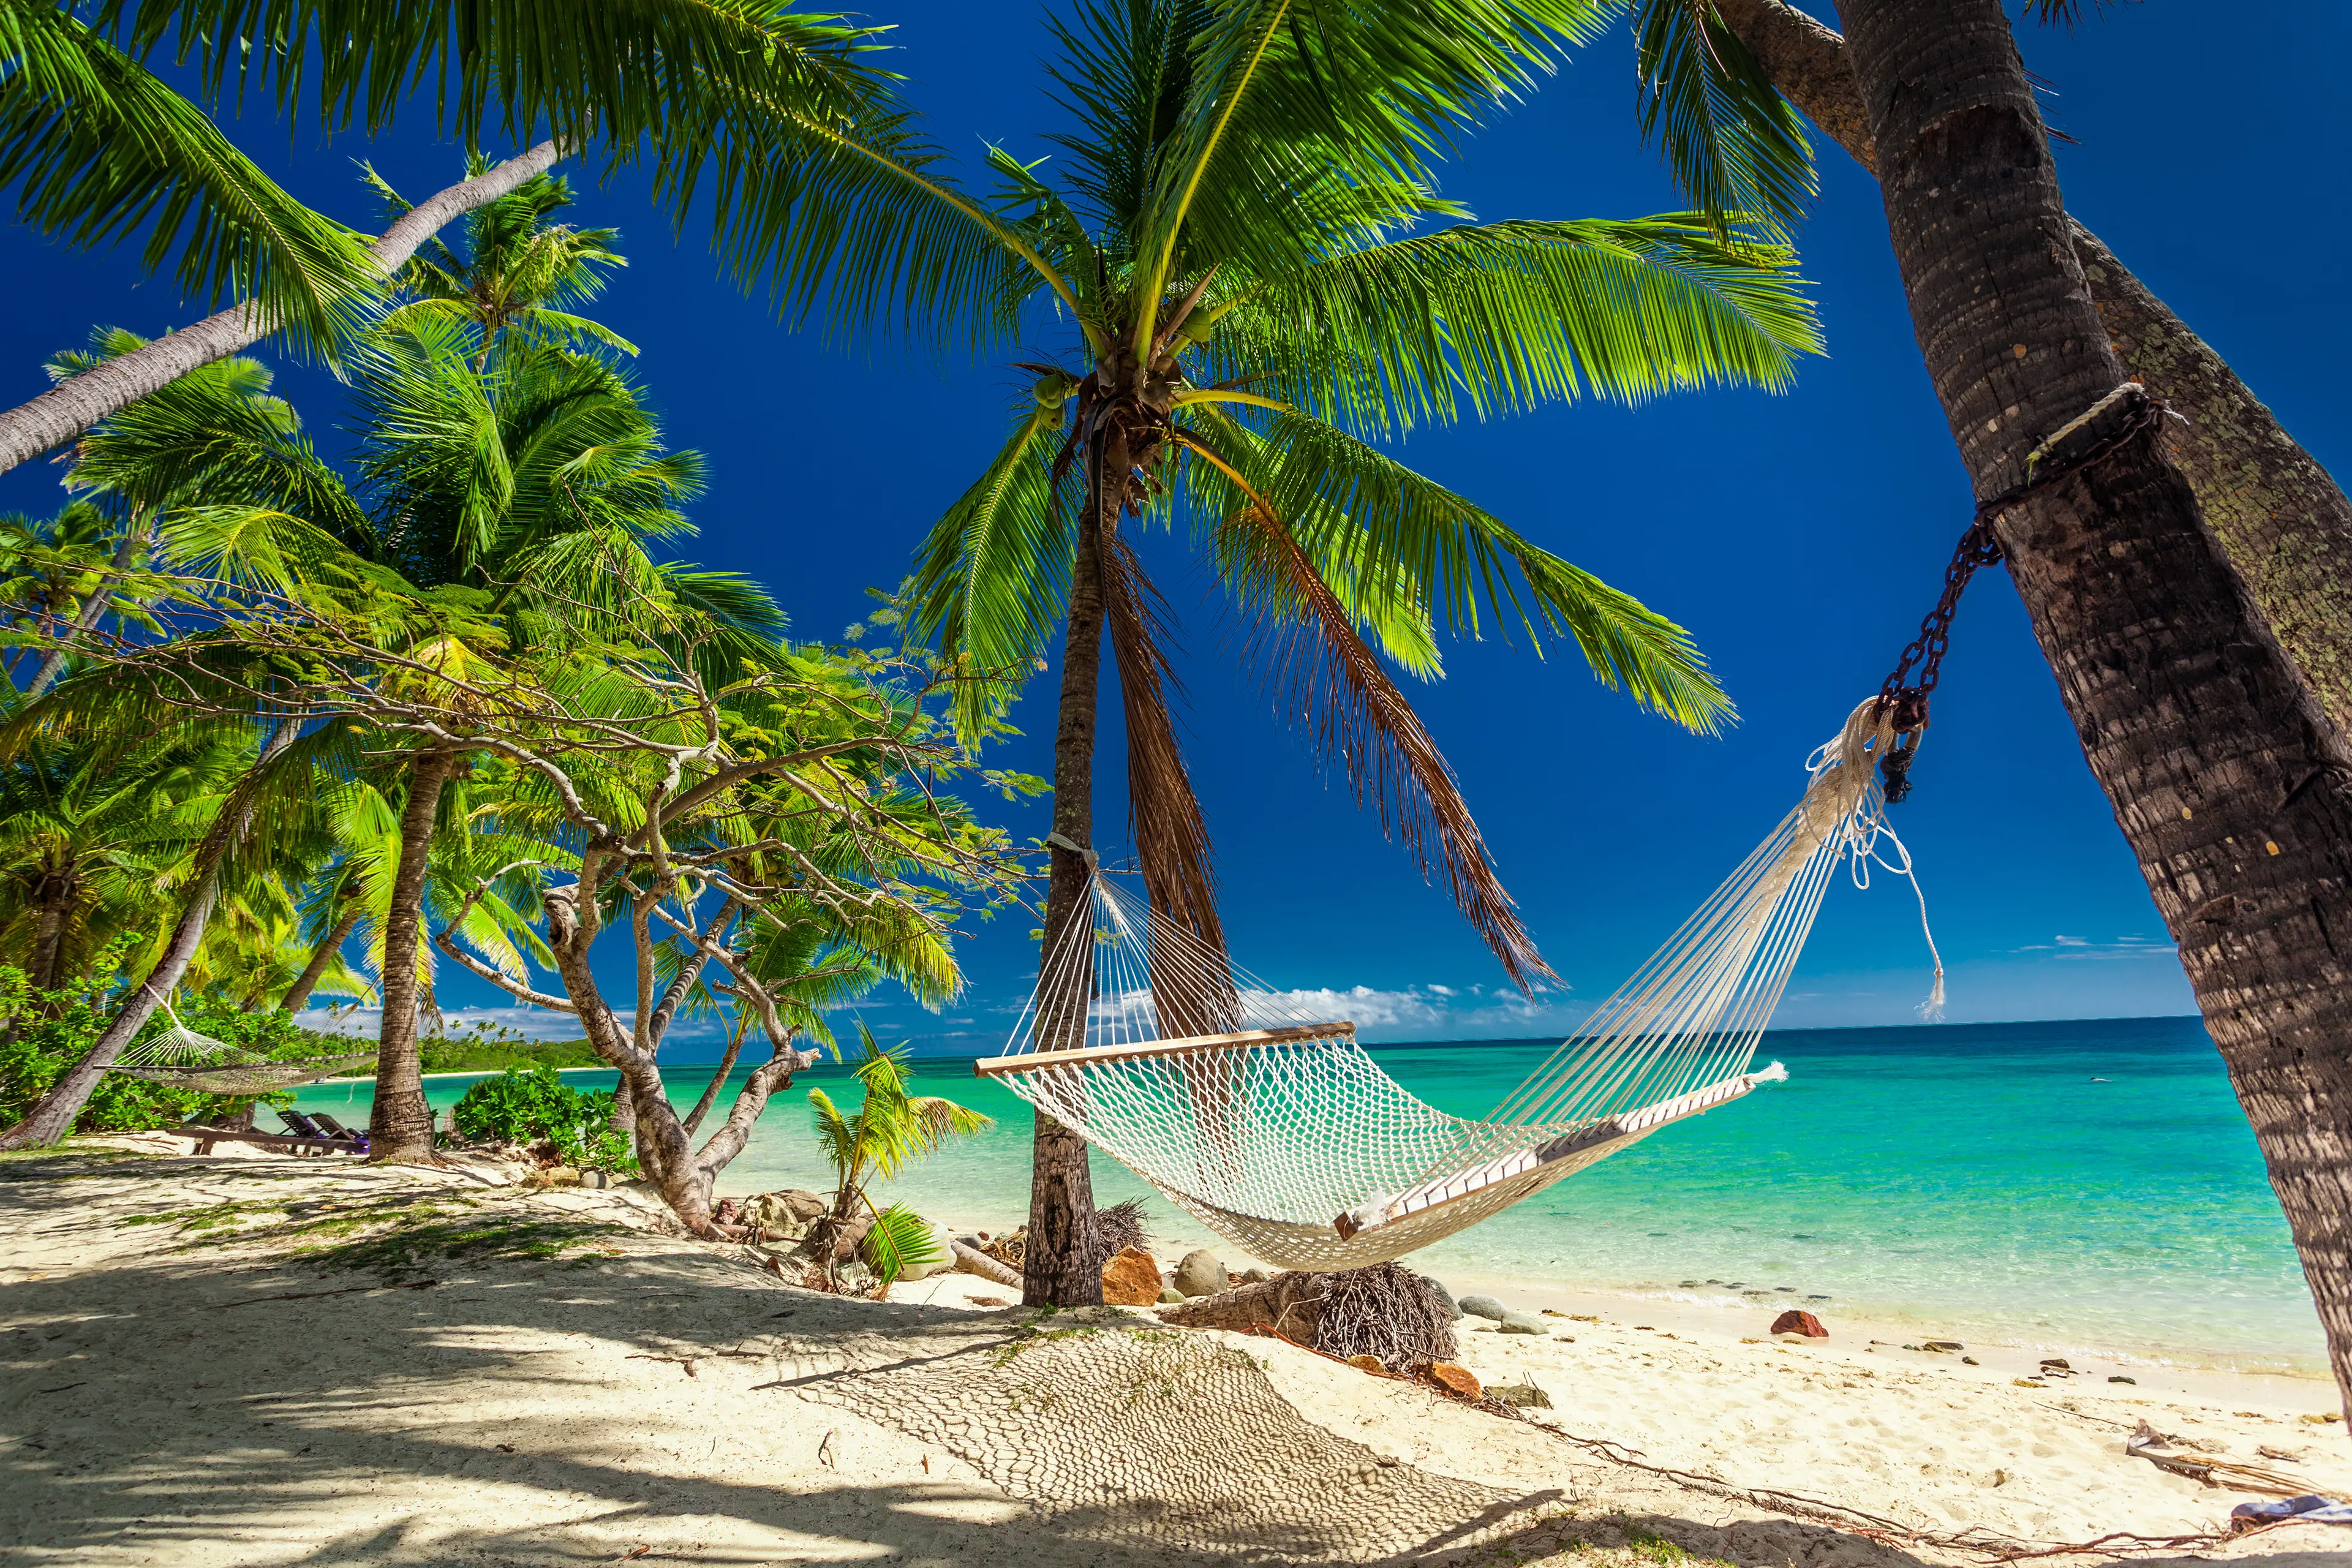 Hammock in the shade of palm trees on tropical island